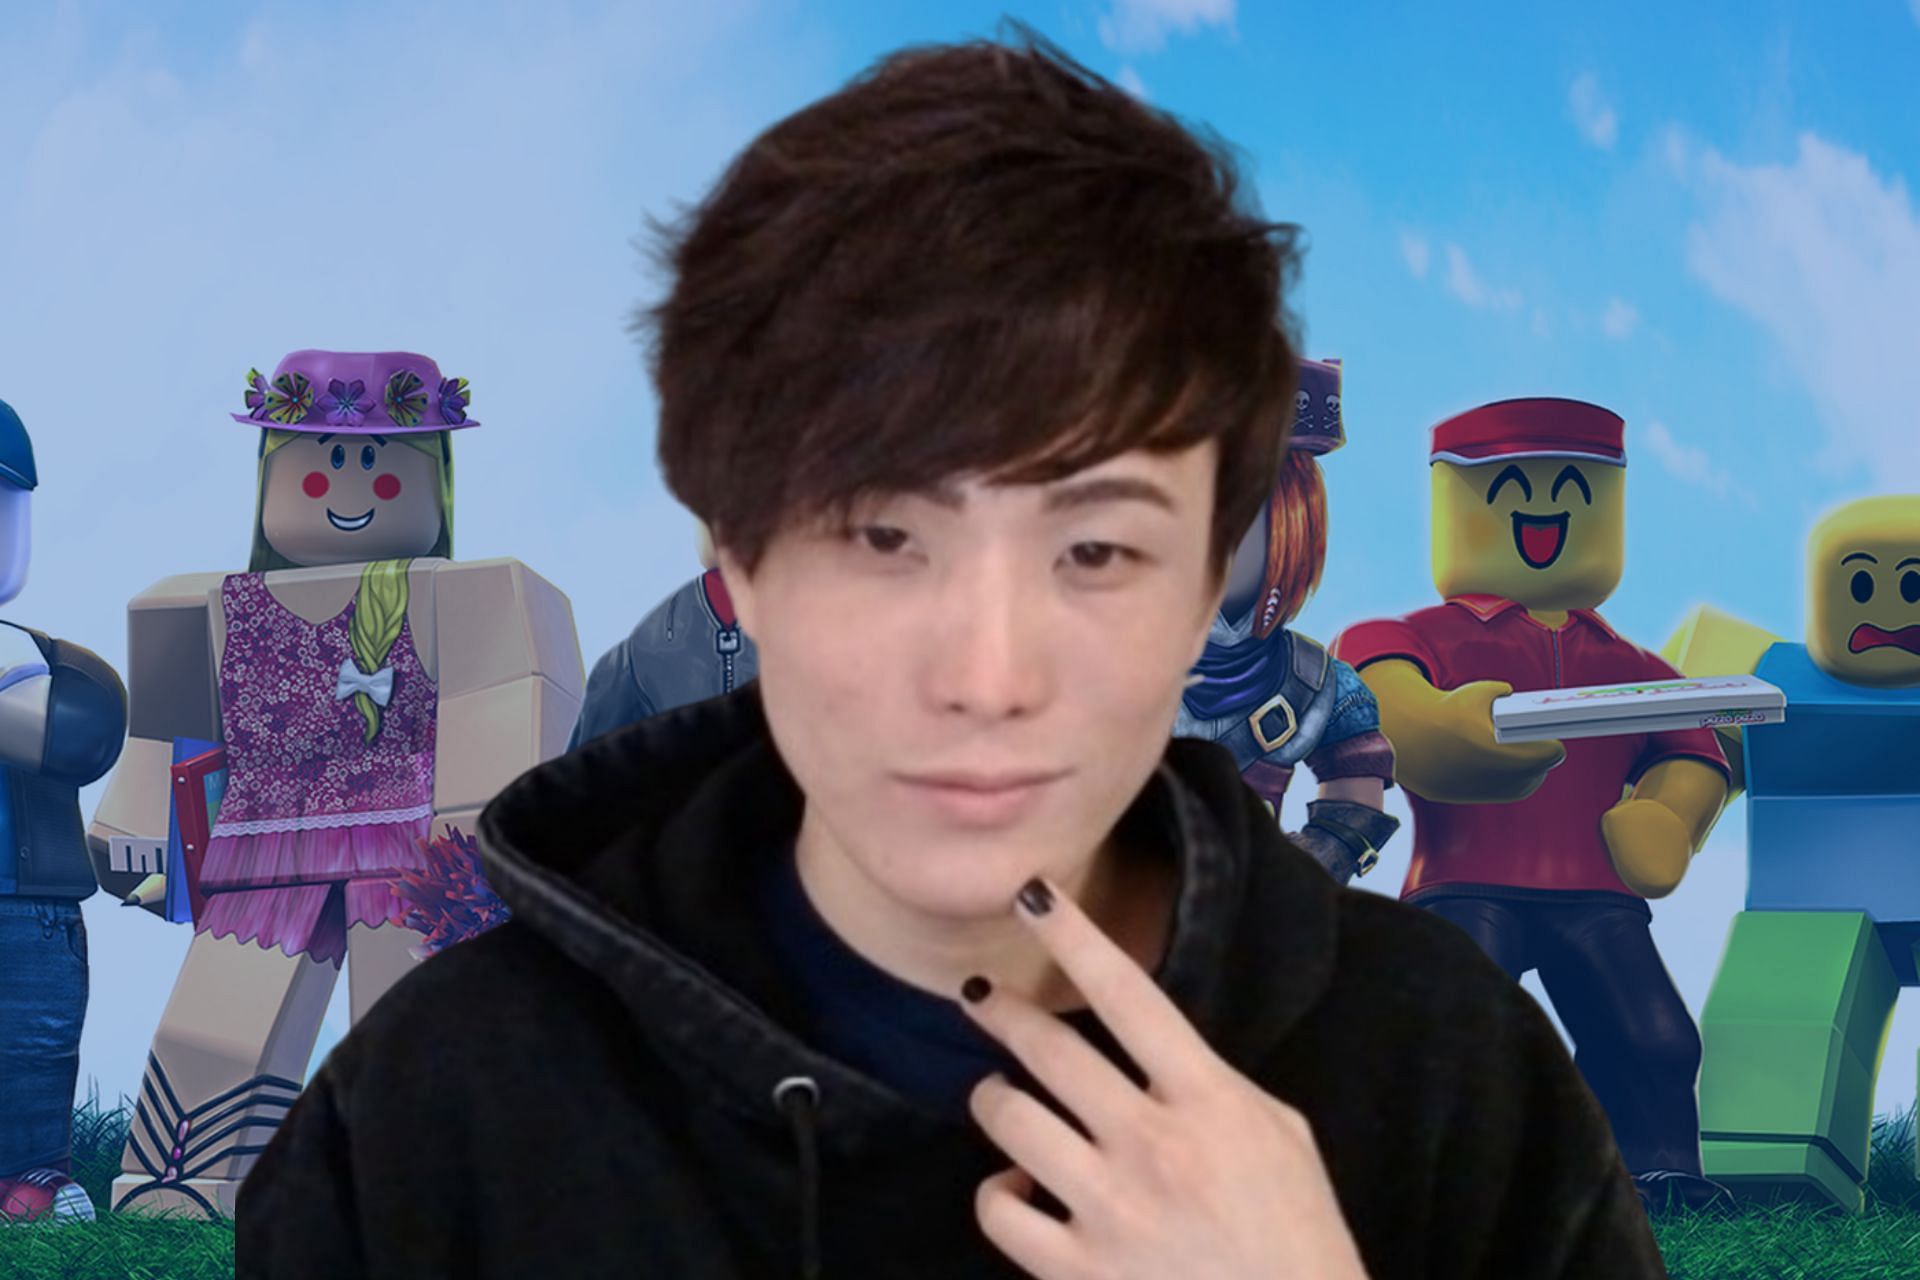 Sykkuno calls out stream snipers who were blatantly hacking in Roblox (Image via Sportskeeda)